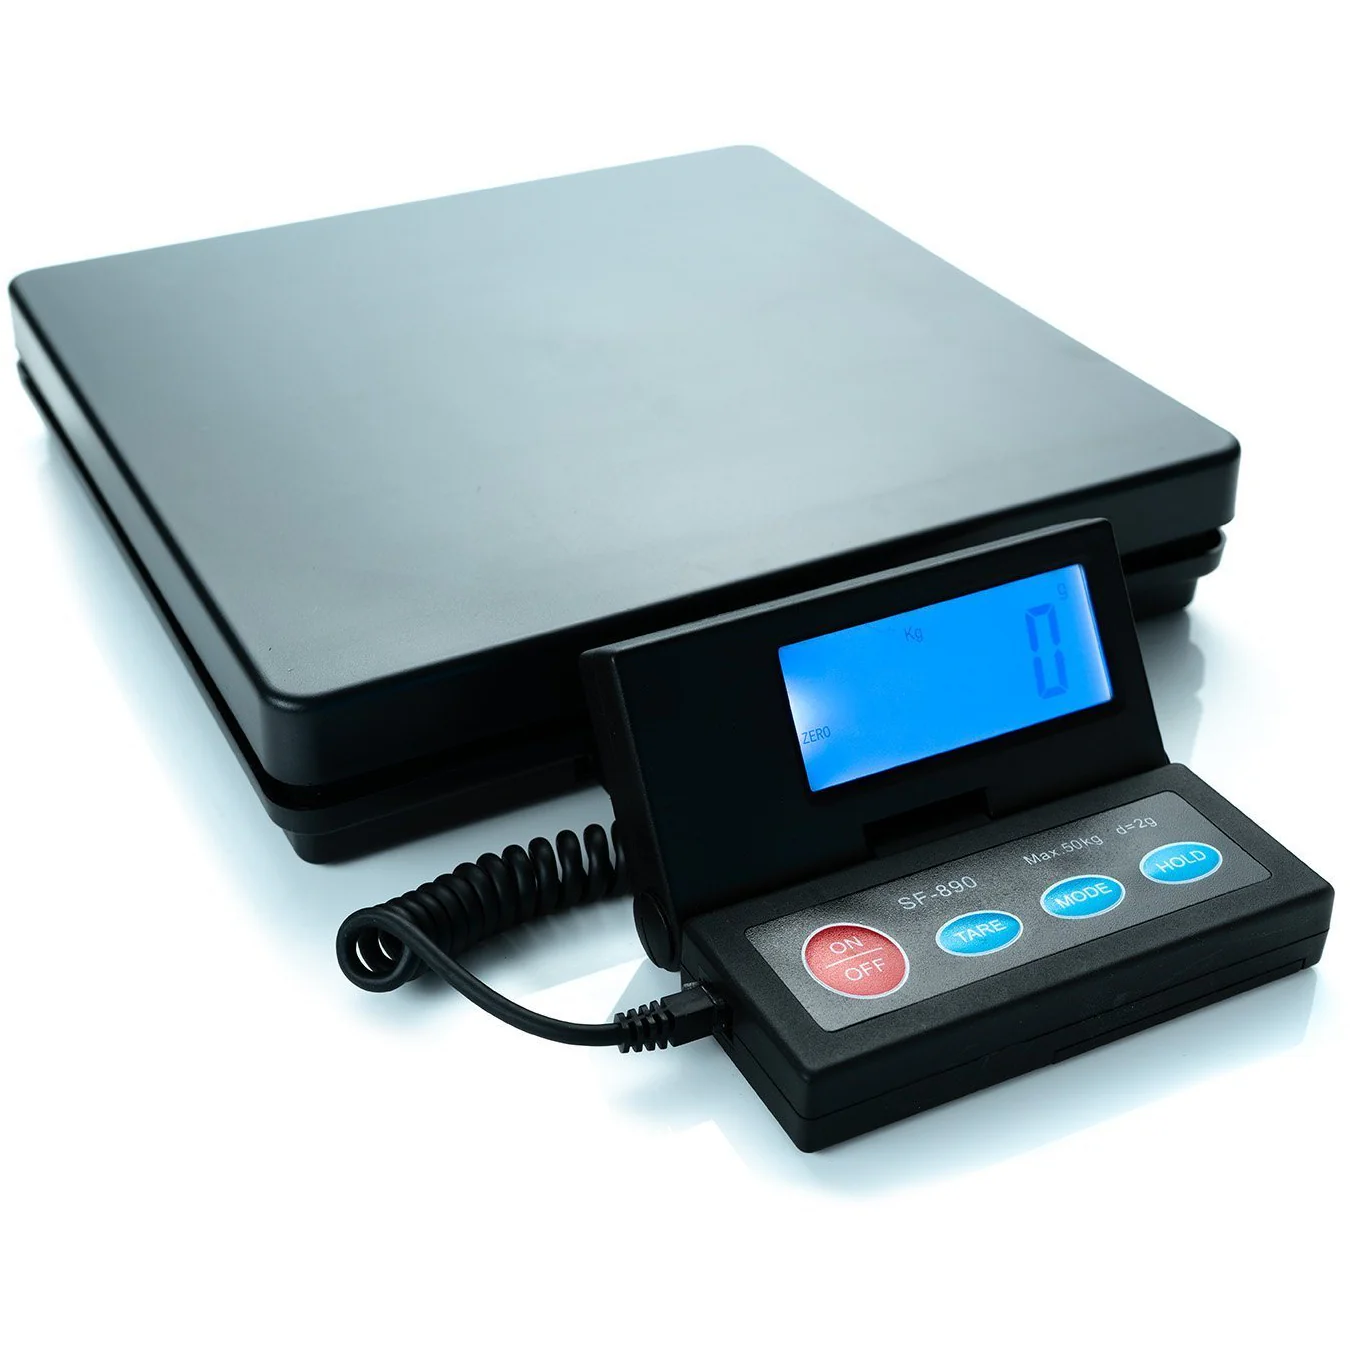 Postal Scale 110lb Max, Ounces, Grams, Lbs, Kg Questions & Answers